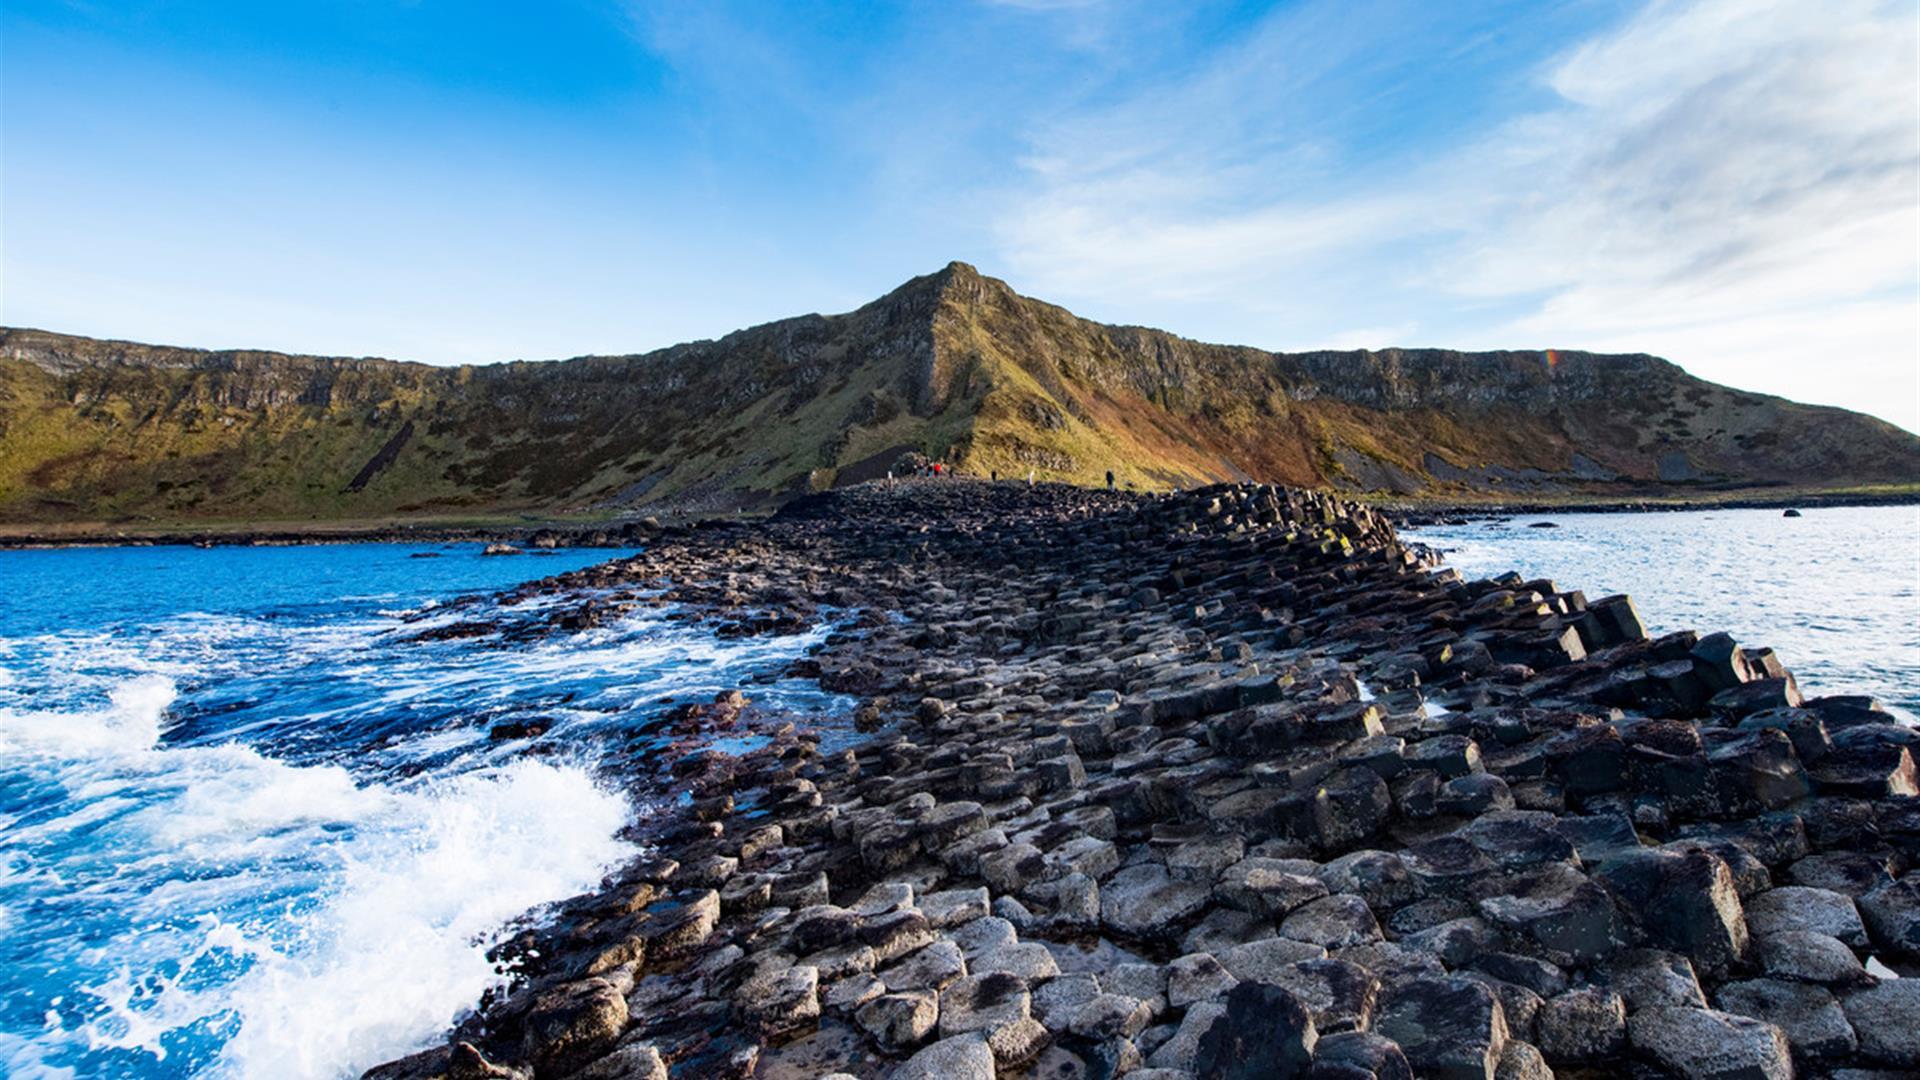 The basalt stones at the giants causeway stretch into the sea